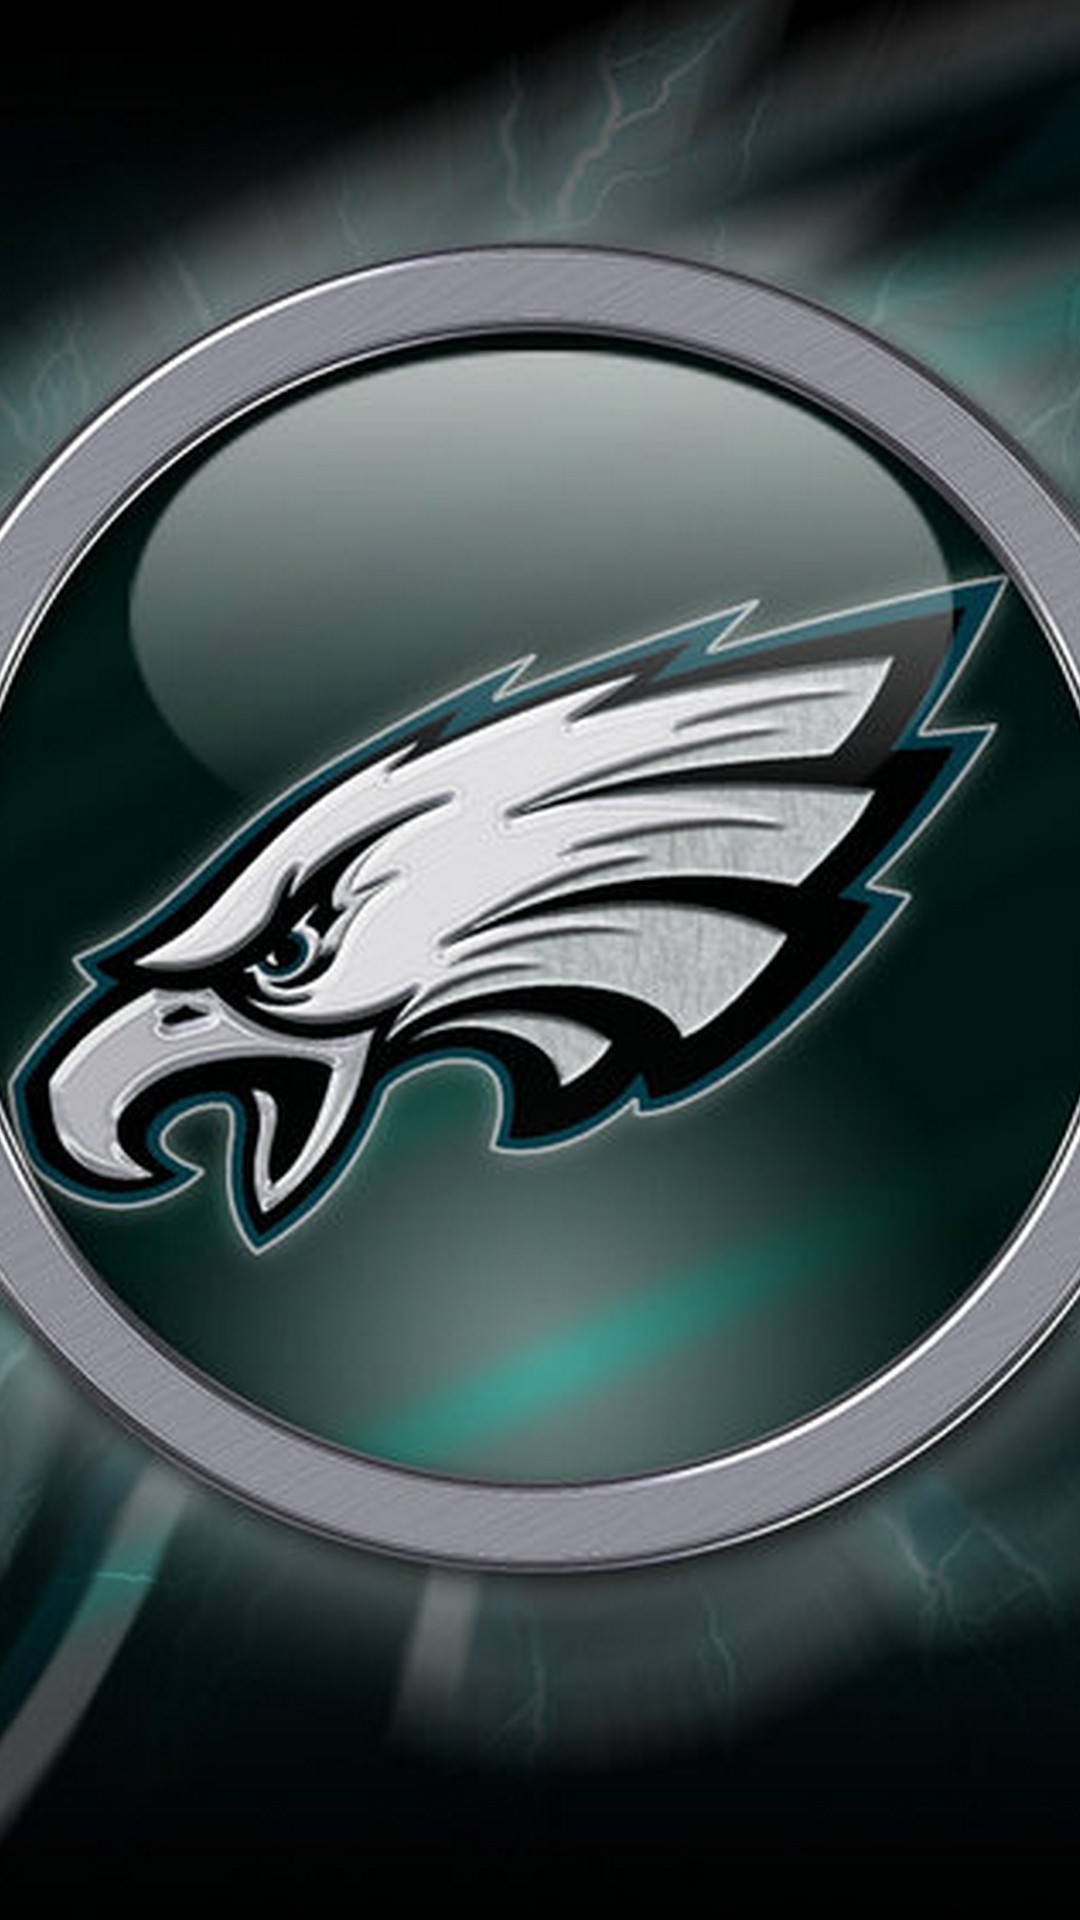 iPhone Wallpaper HD Eagles Football With Resolution 1080X1920 pixel. You can make this wallpaper for your Mac or Windows Desktop Background, iPhone, Android or Tablet and another Smartphone device for free